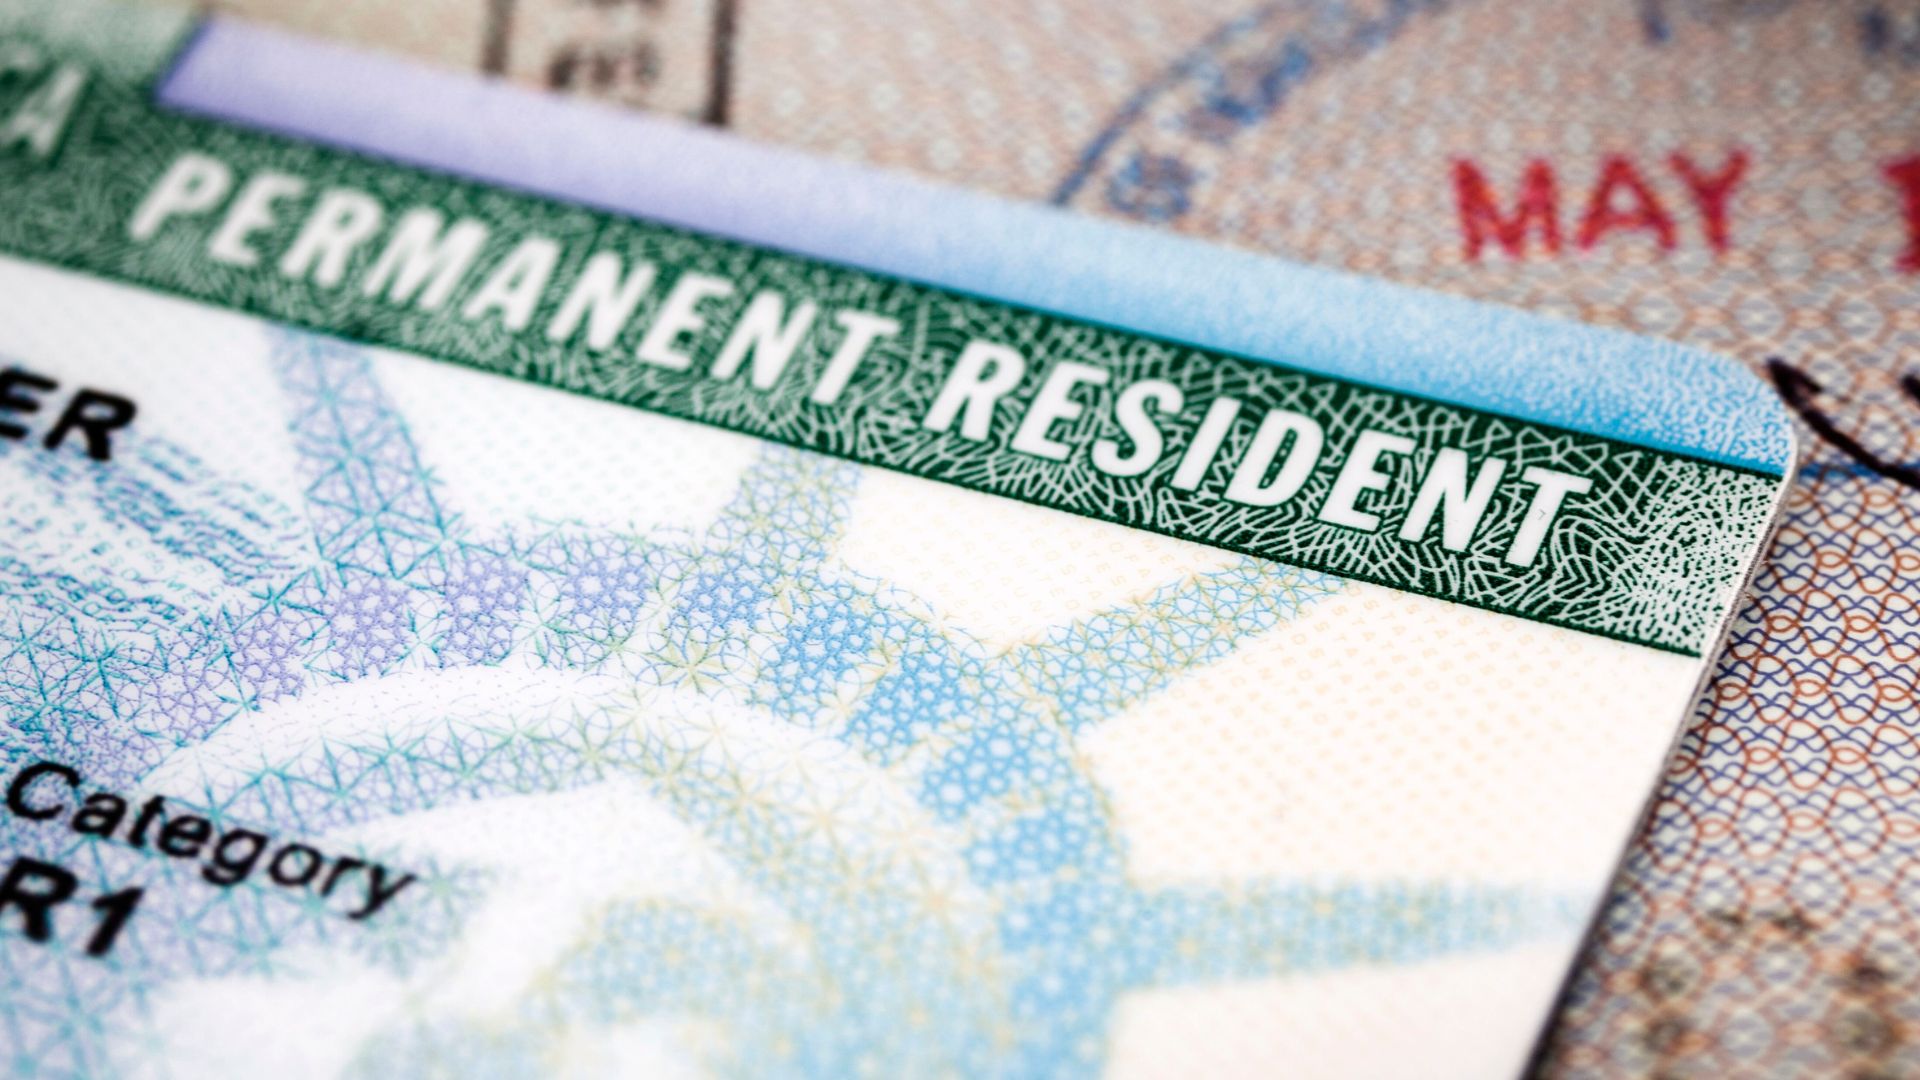 A green card is a permanent resident card in the United States Photo: Epoxydude / Getty Images